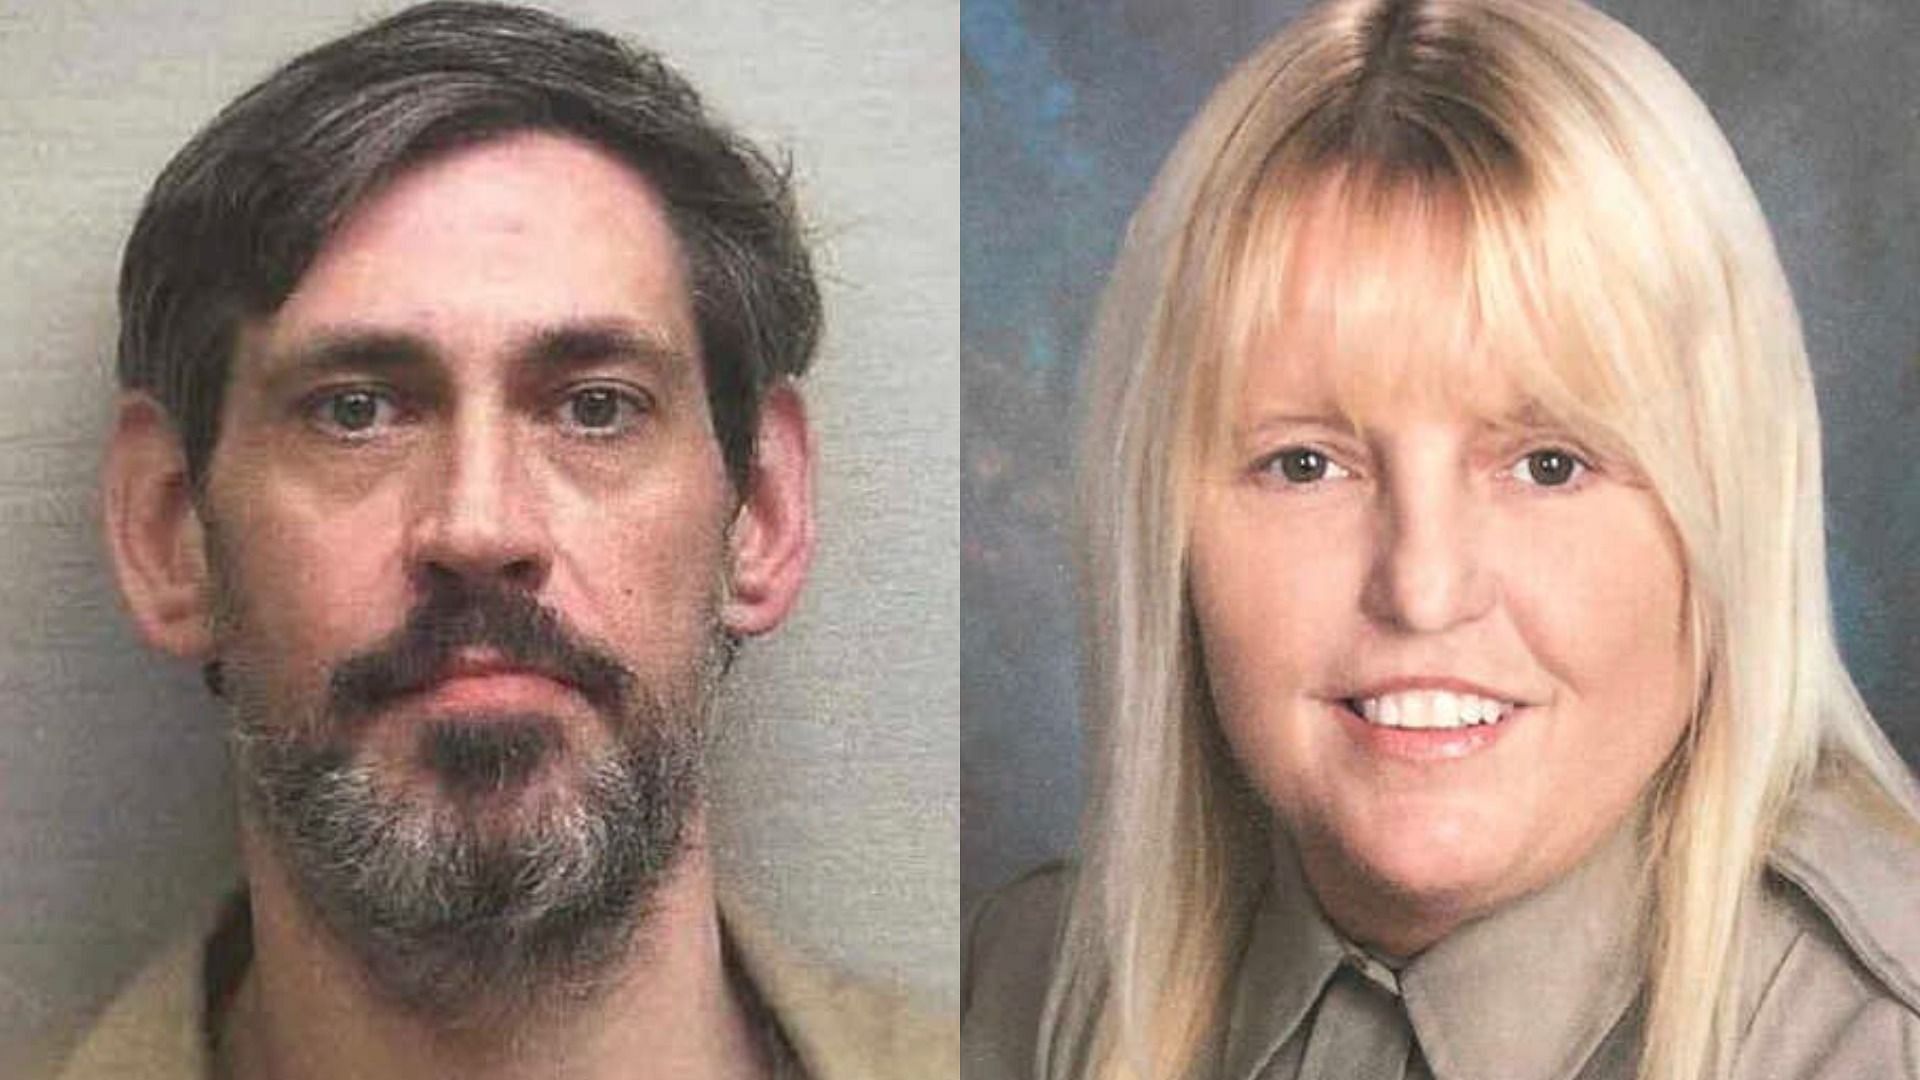 Escaped Alabama inmate Casey White was recently captured while his alleged partner, corrections officer Vicky White, shot herself in the head (Image via Philip Lewis/Twitter)